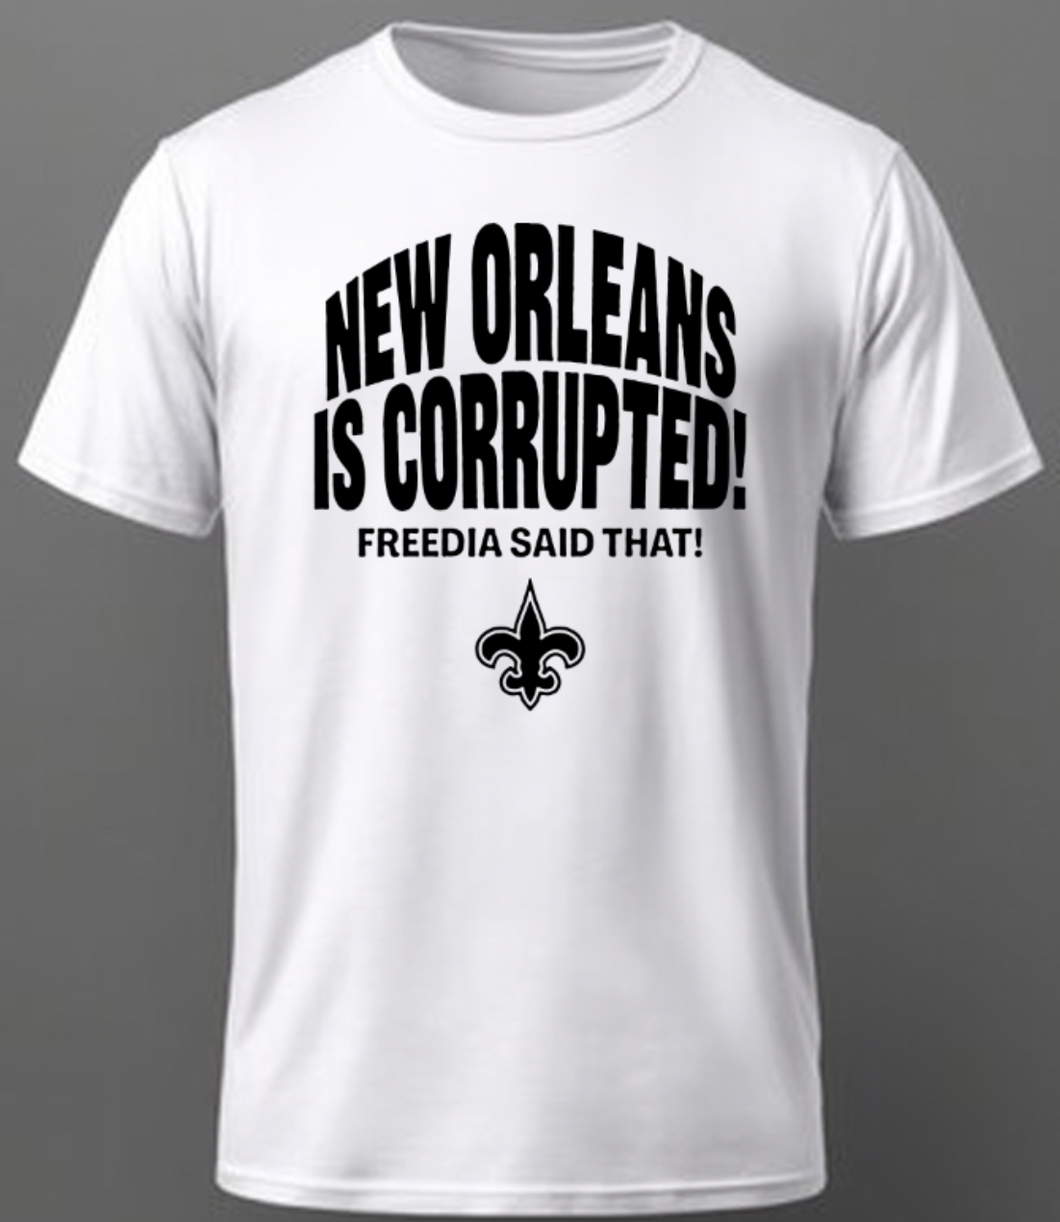 New Orleans Is Corrupted! Fundraiser T-Shirt